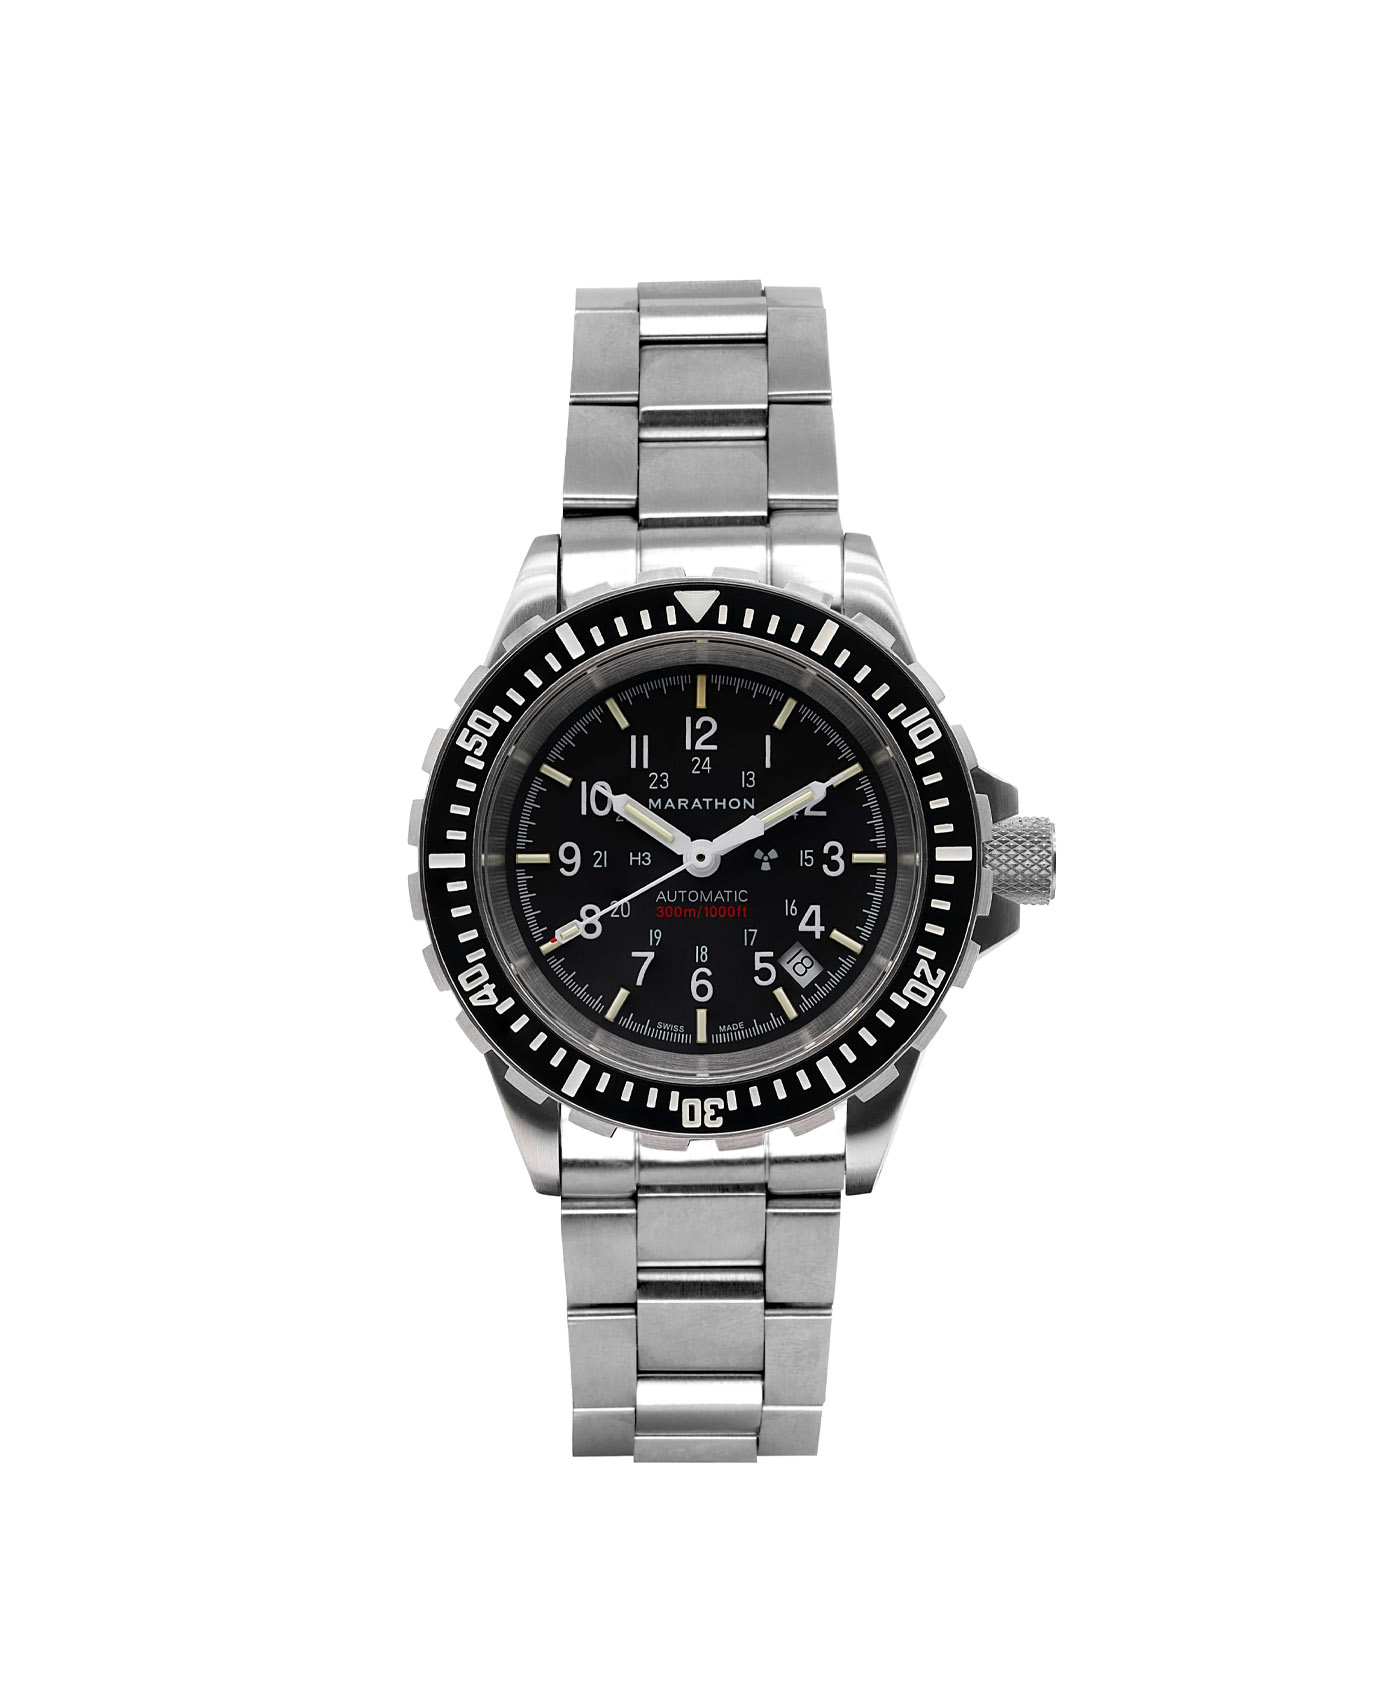 Marathon-41mm-Large-Divers-Automatic-GSAR-With-Stainless-Steel-Bracelet